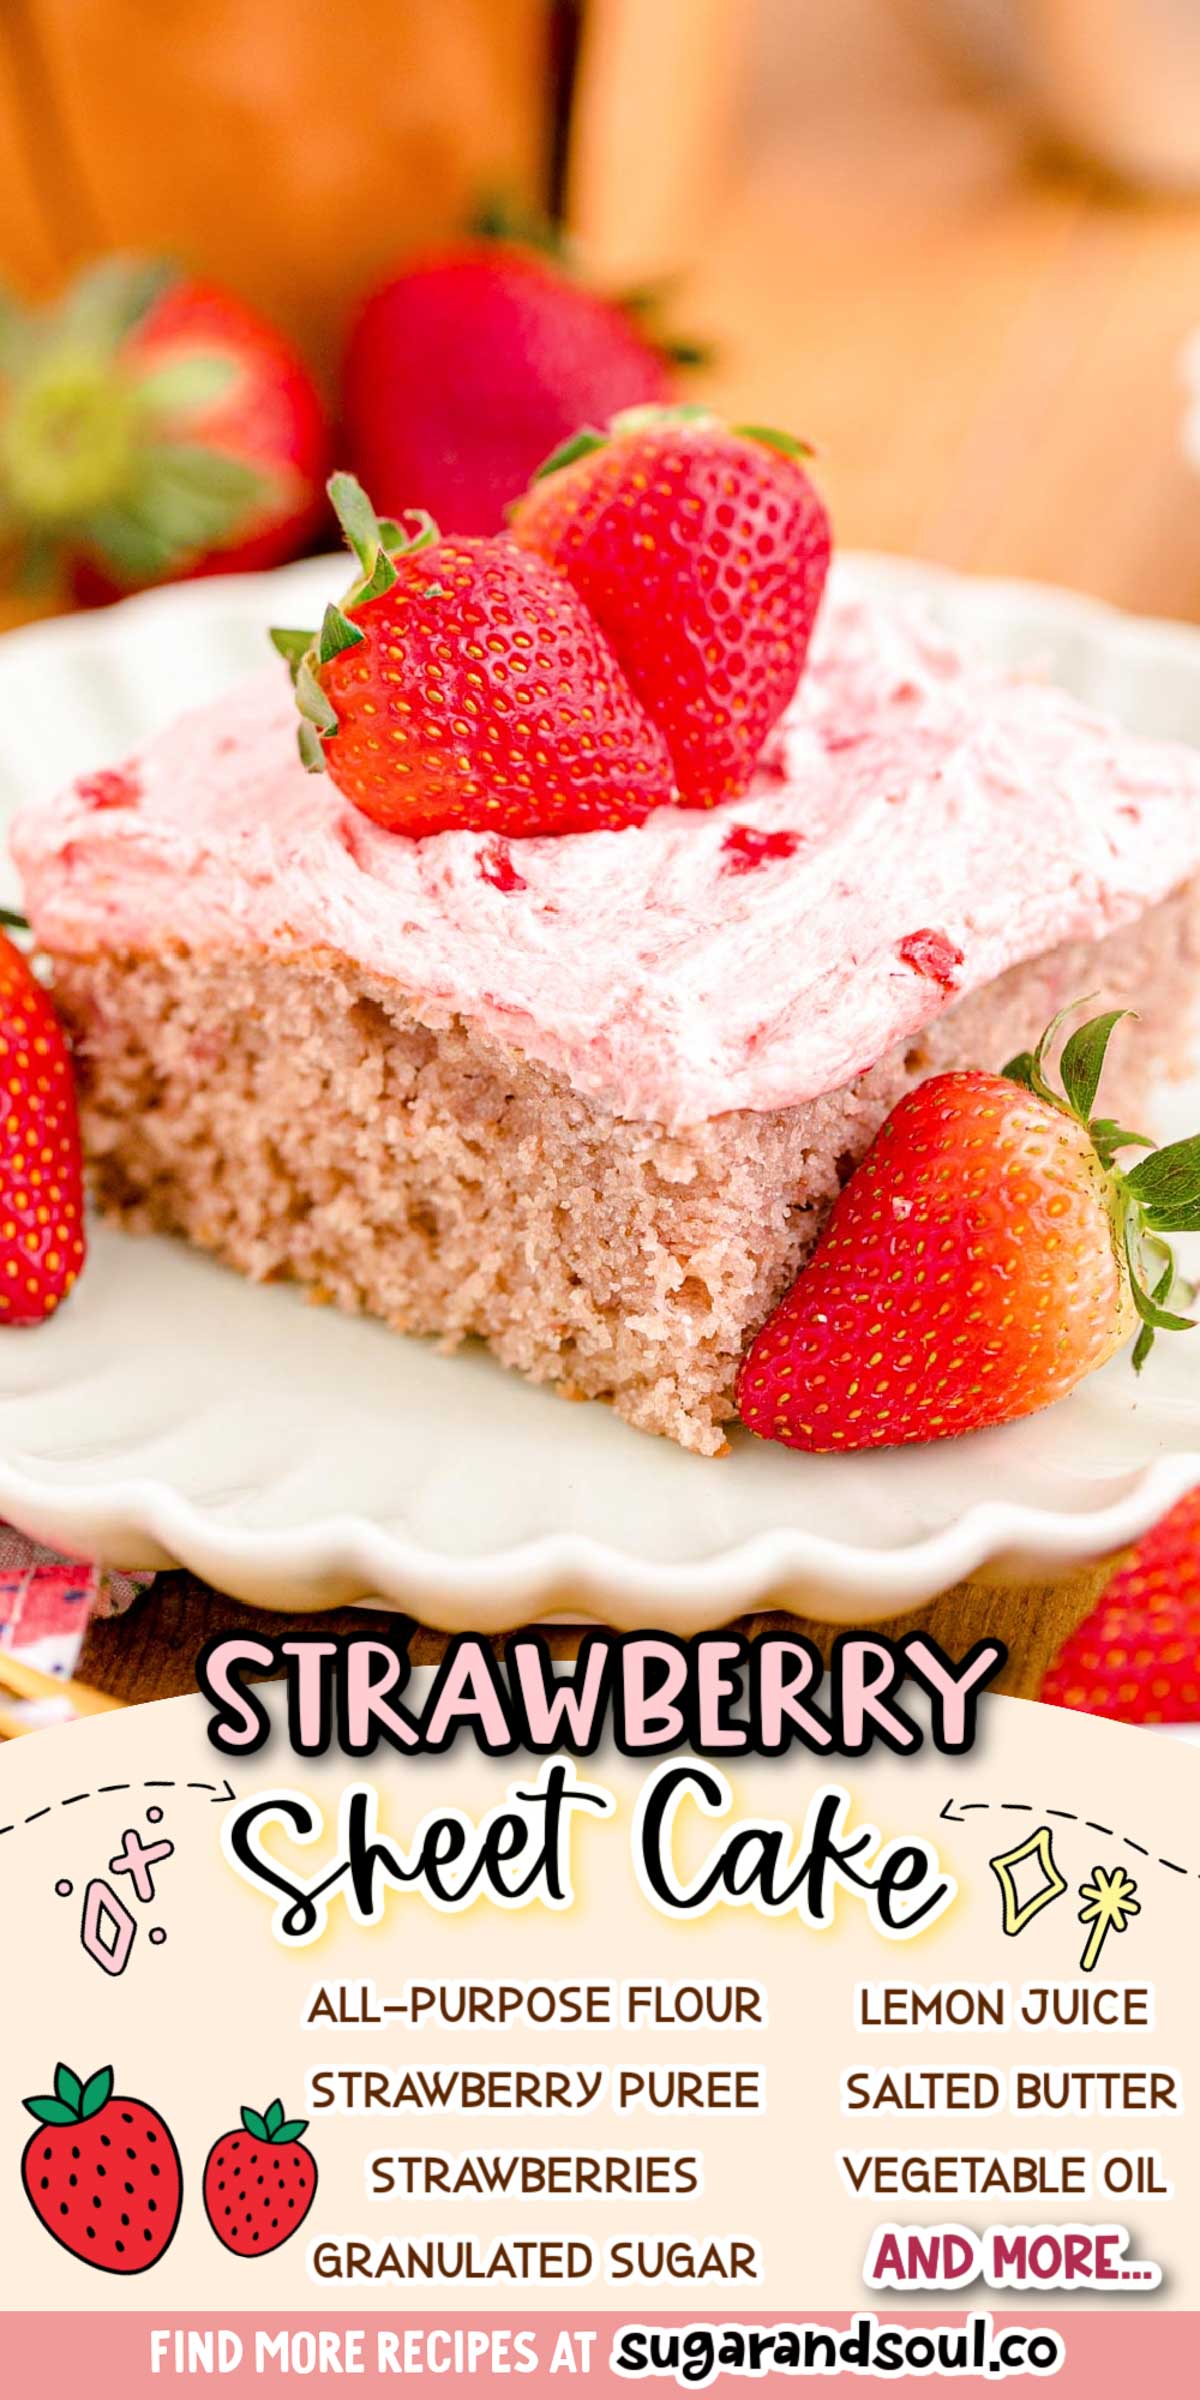 Strawberry Sheet Cake is made from scratch by pairing fresh, juicy strawberries with pantry staple ingredients, ready in under an hour! The perfect summertime dessert to share with friends and family! via @sugarandsoulco